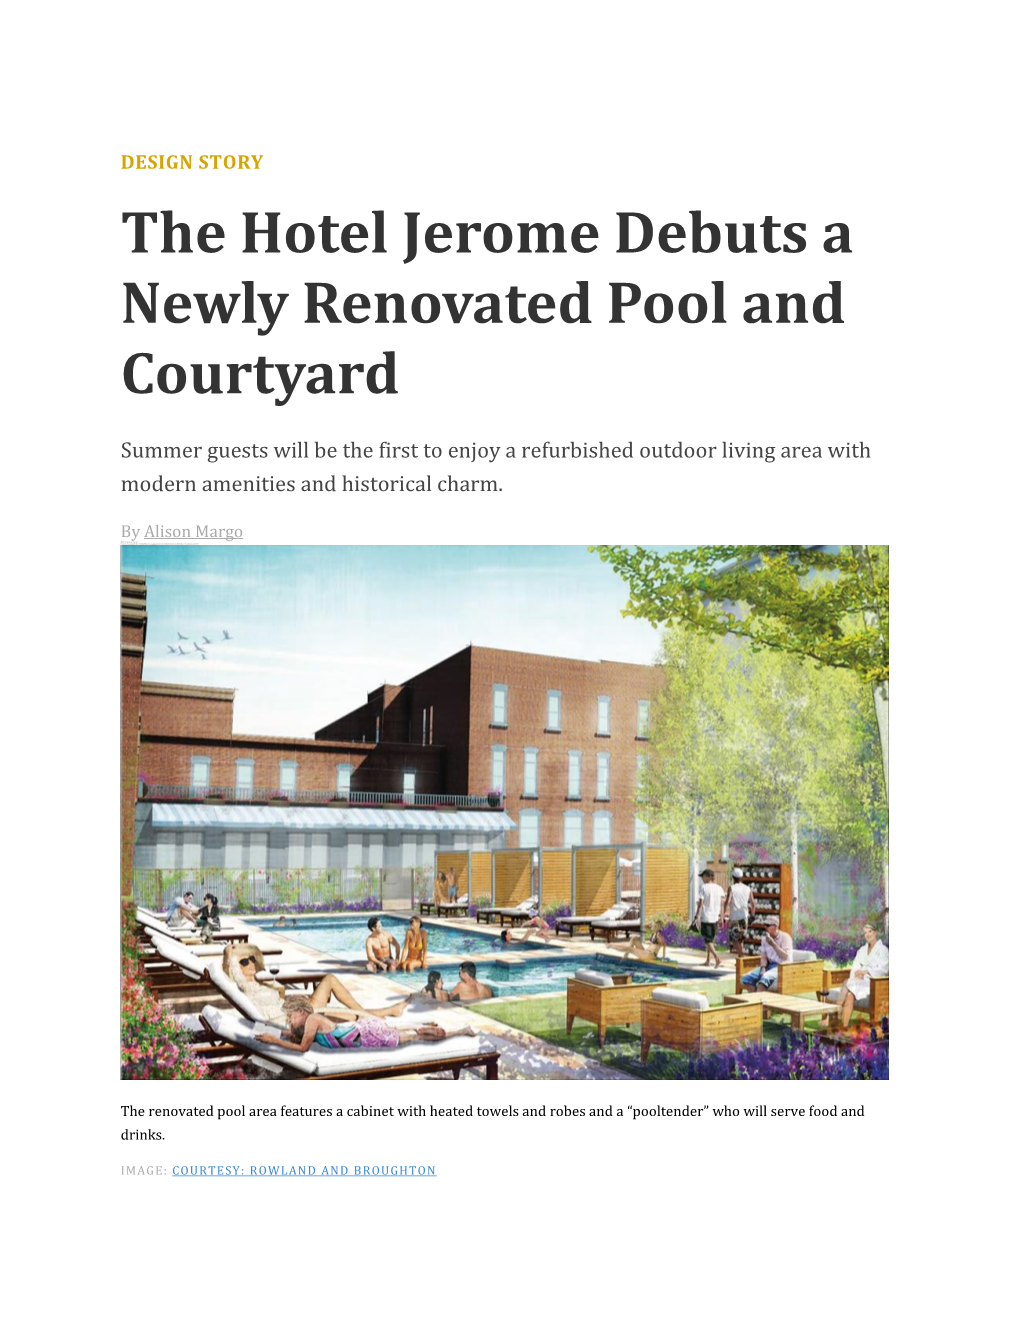 The Hotel Jerome Debuts a Newly Renovated Pool and Courtyard